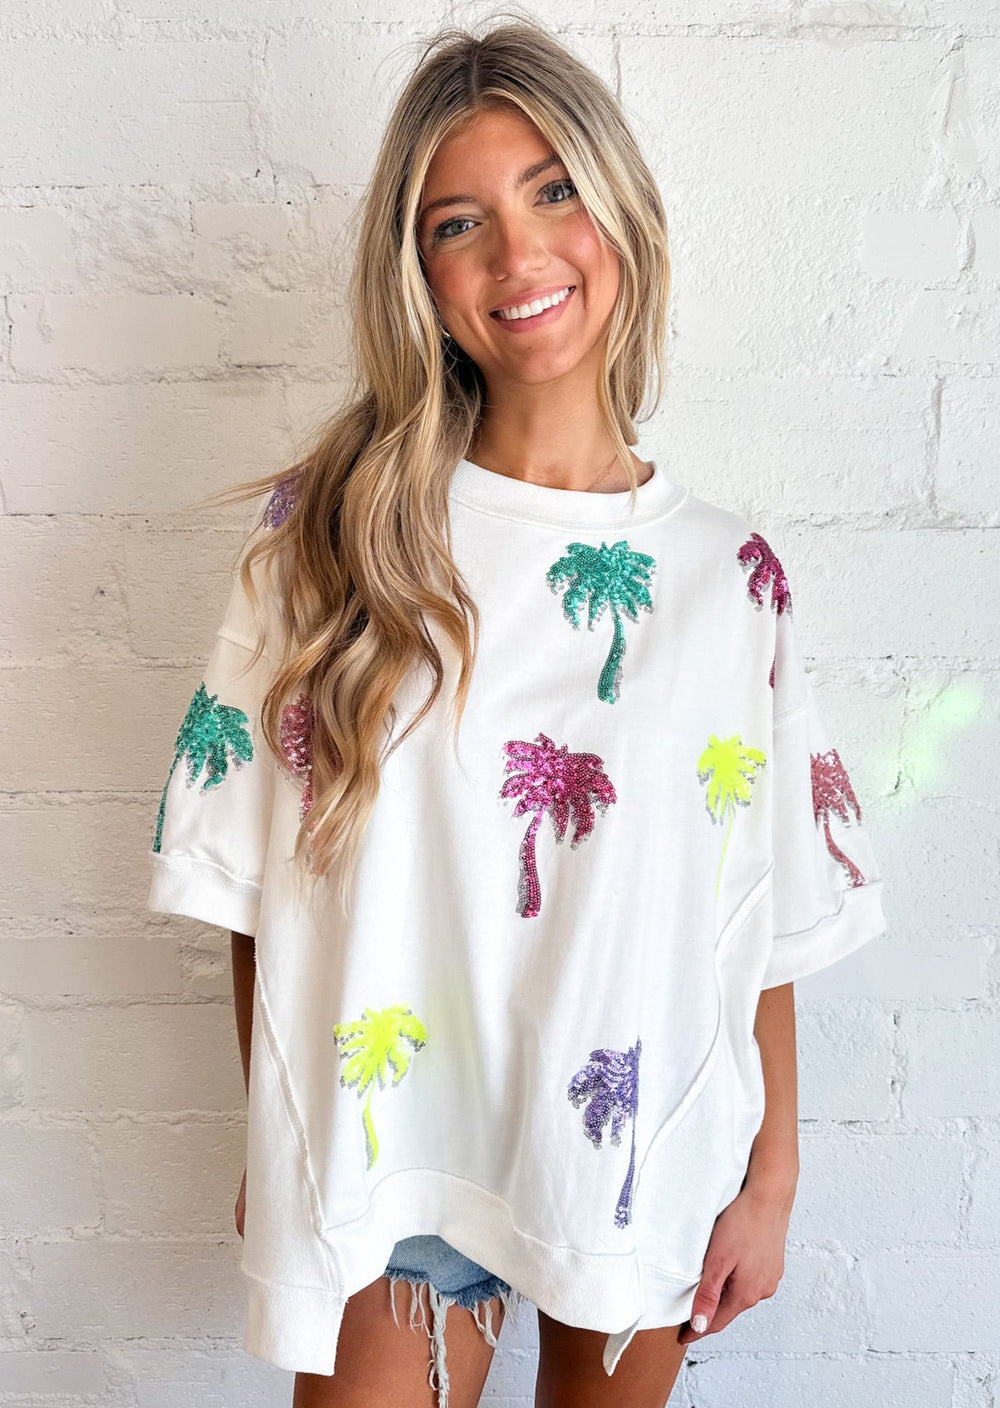 Palm Tree Sequin Top, Tops, Adeline, Adeline, dallas boutique, dallas texas, texas boutique, women's boutique dallas, adeline boutique, dallas boutique, trendy boutique, affordable boutique